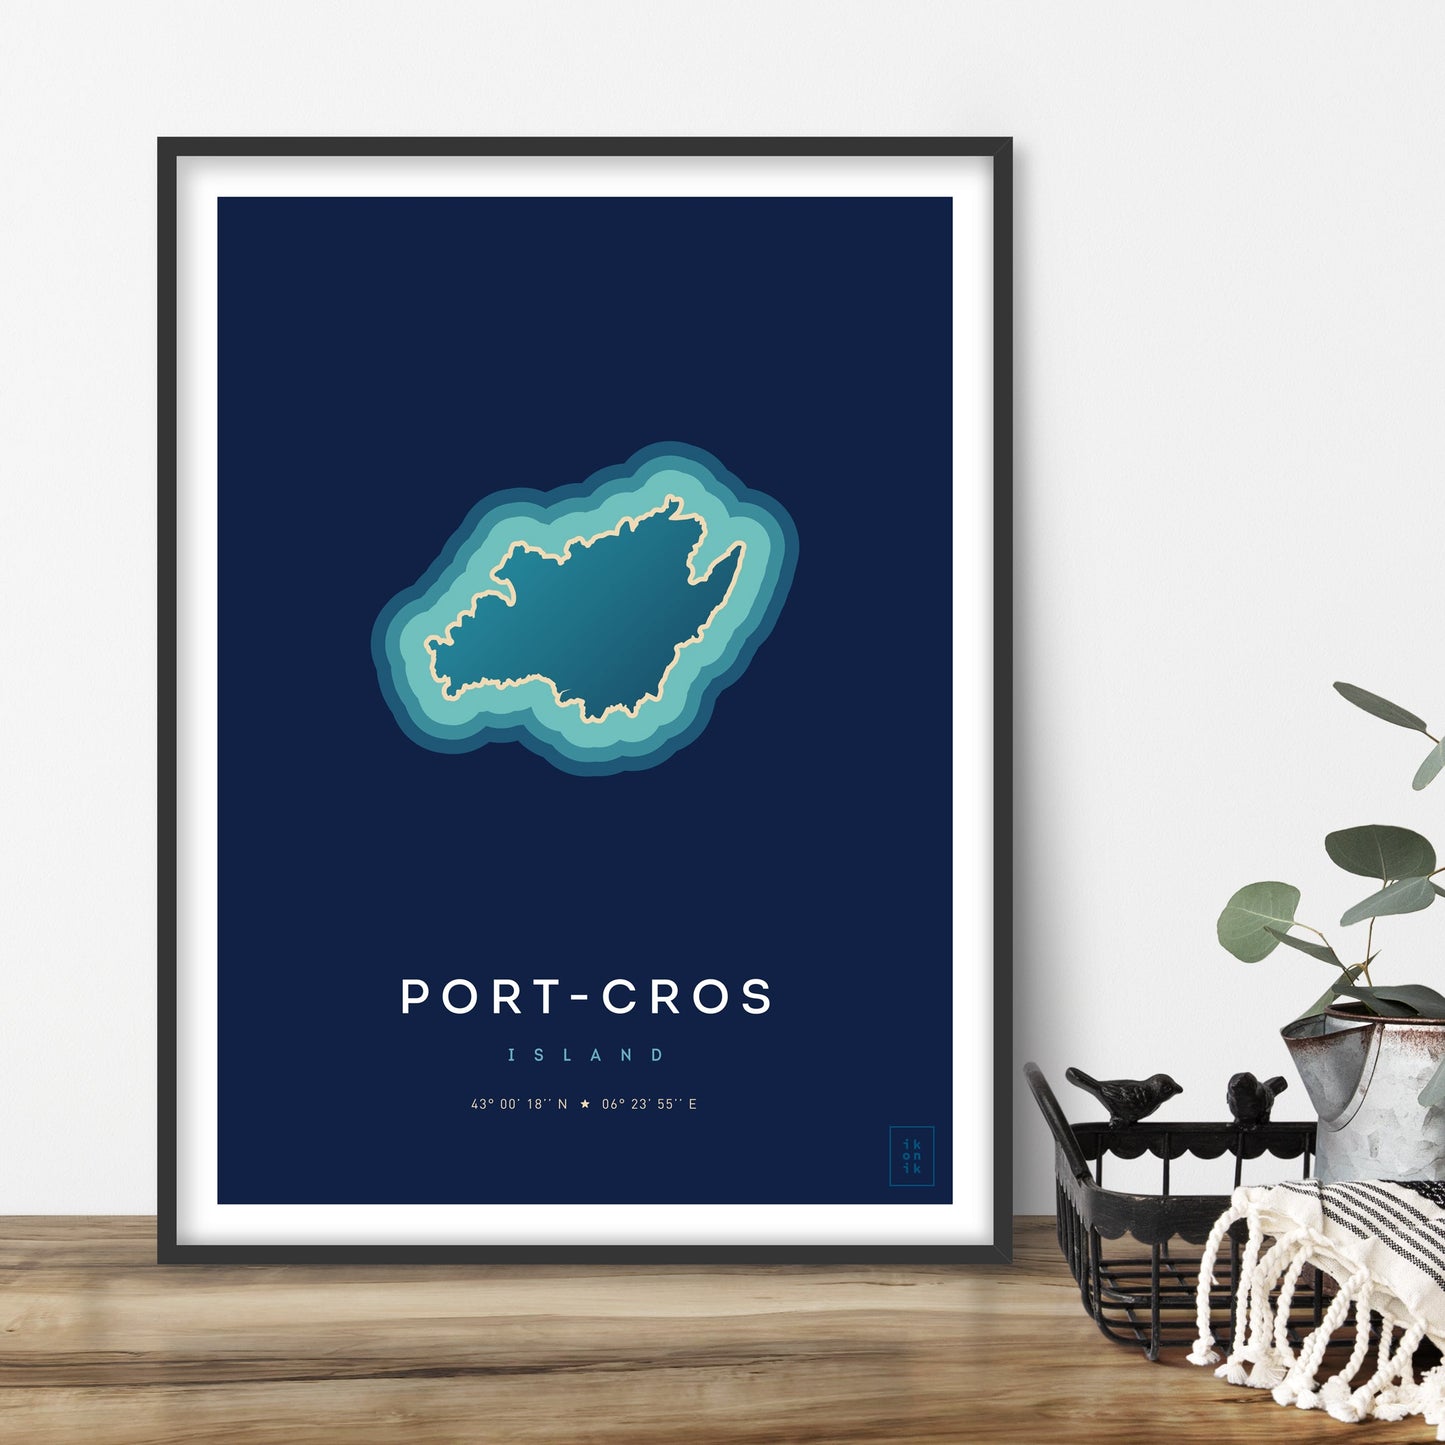 Poster of the island of Port-Cros